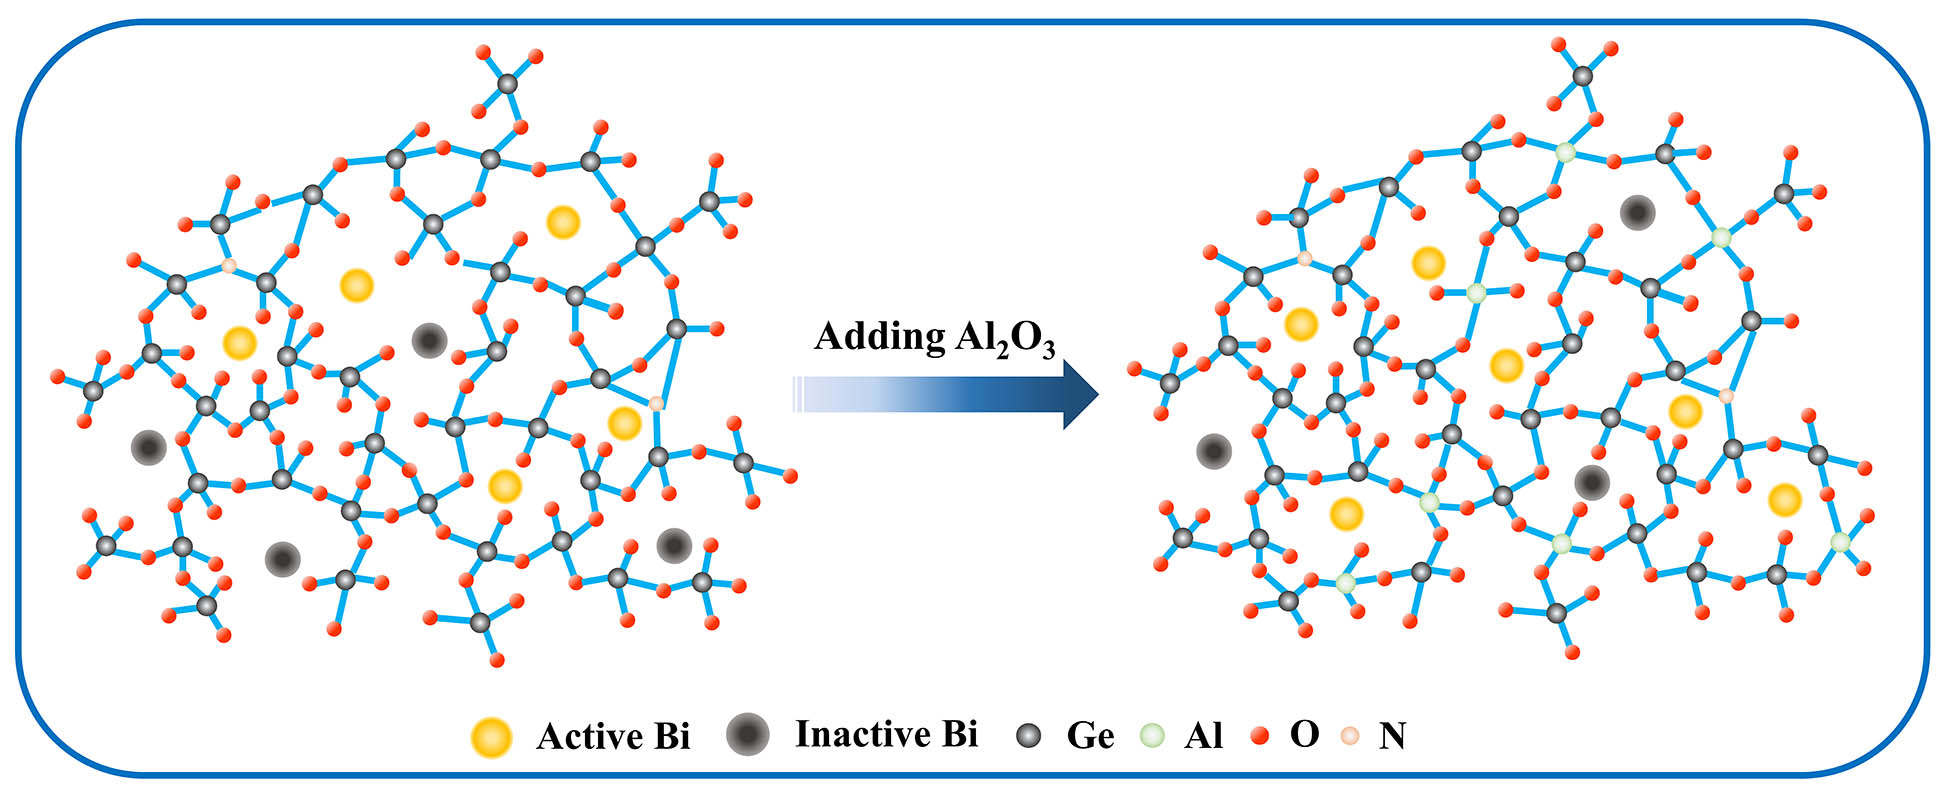 Evolution of the microscopic structure of Bi-doped nitridated germanate glass with the introduction of Al2O3.